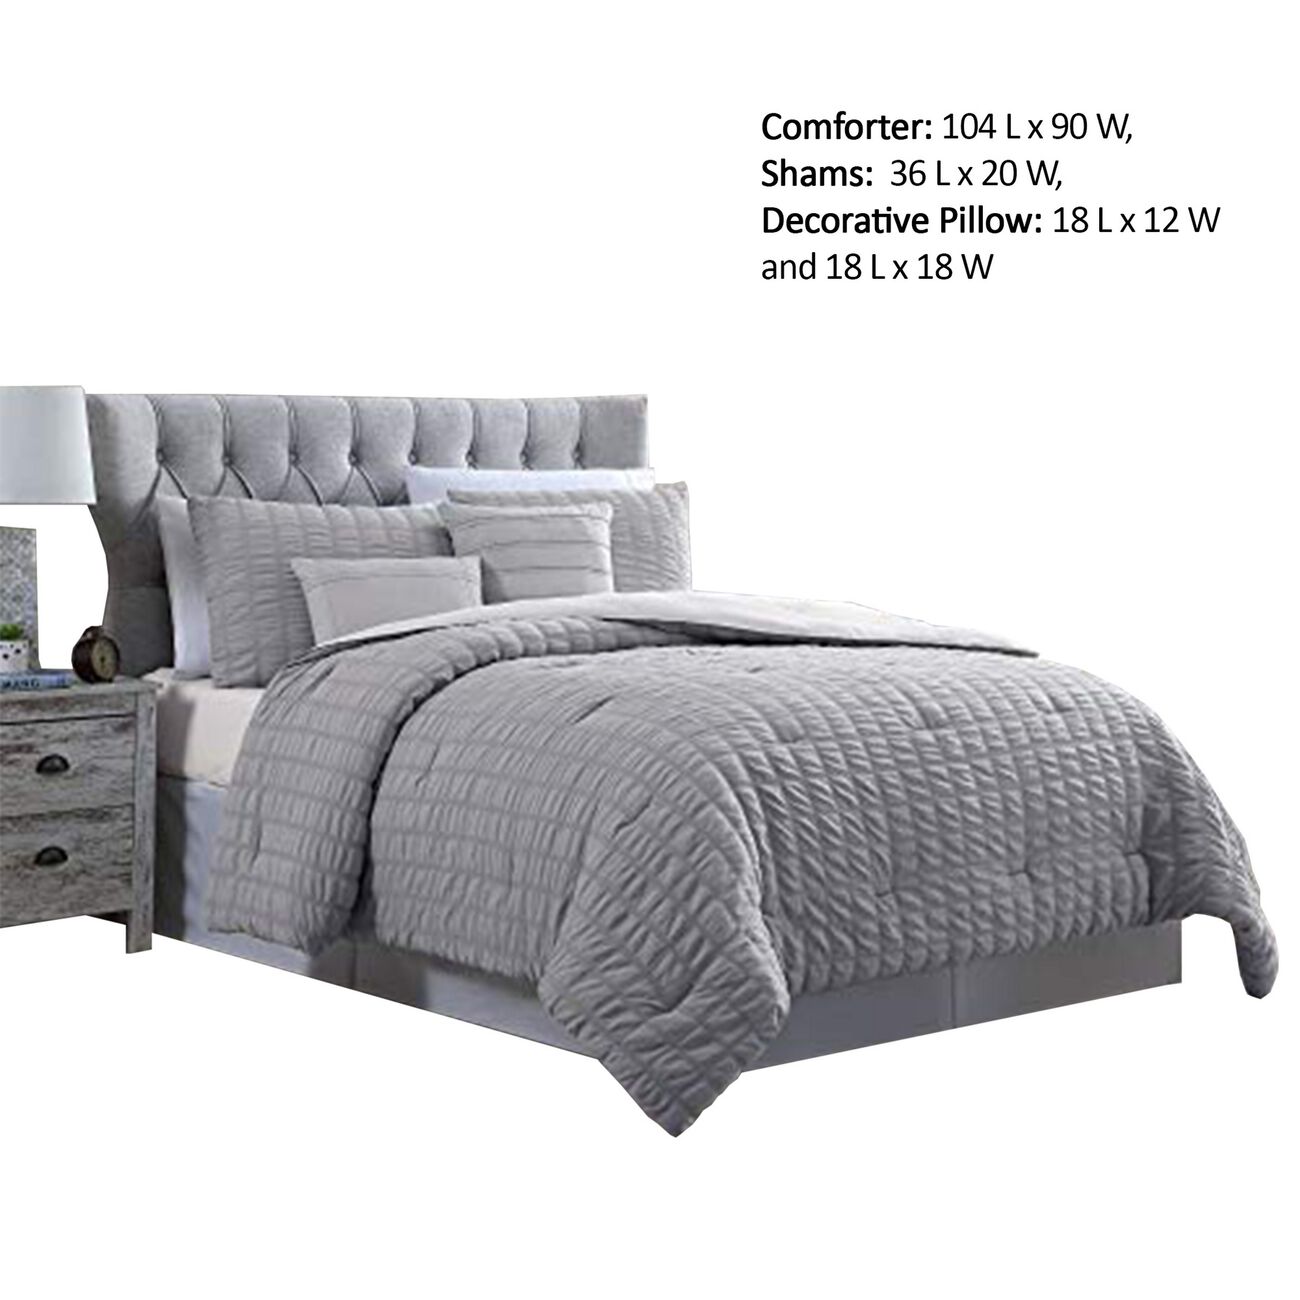 Valletta 5 Piece Stitched Square Pattern King Size Comforter Set The Urban Port, Gray